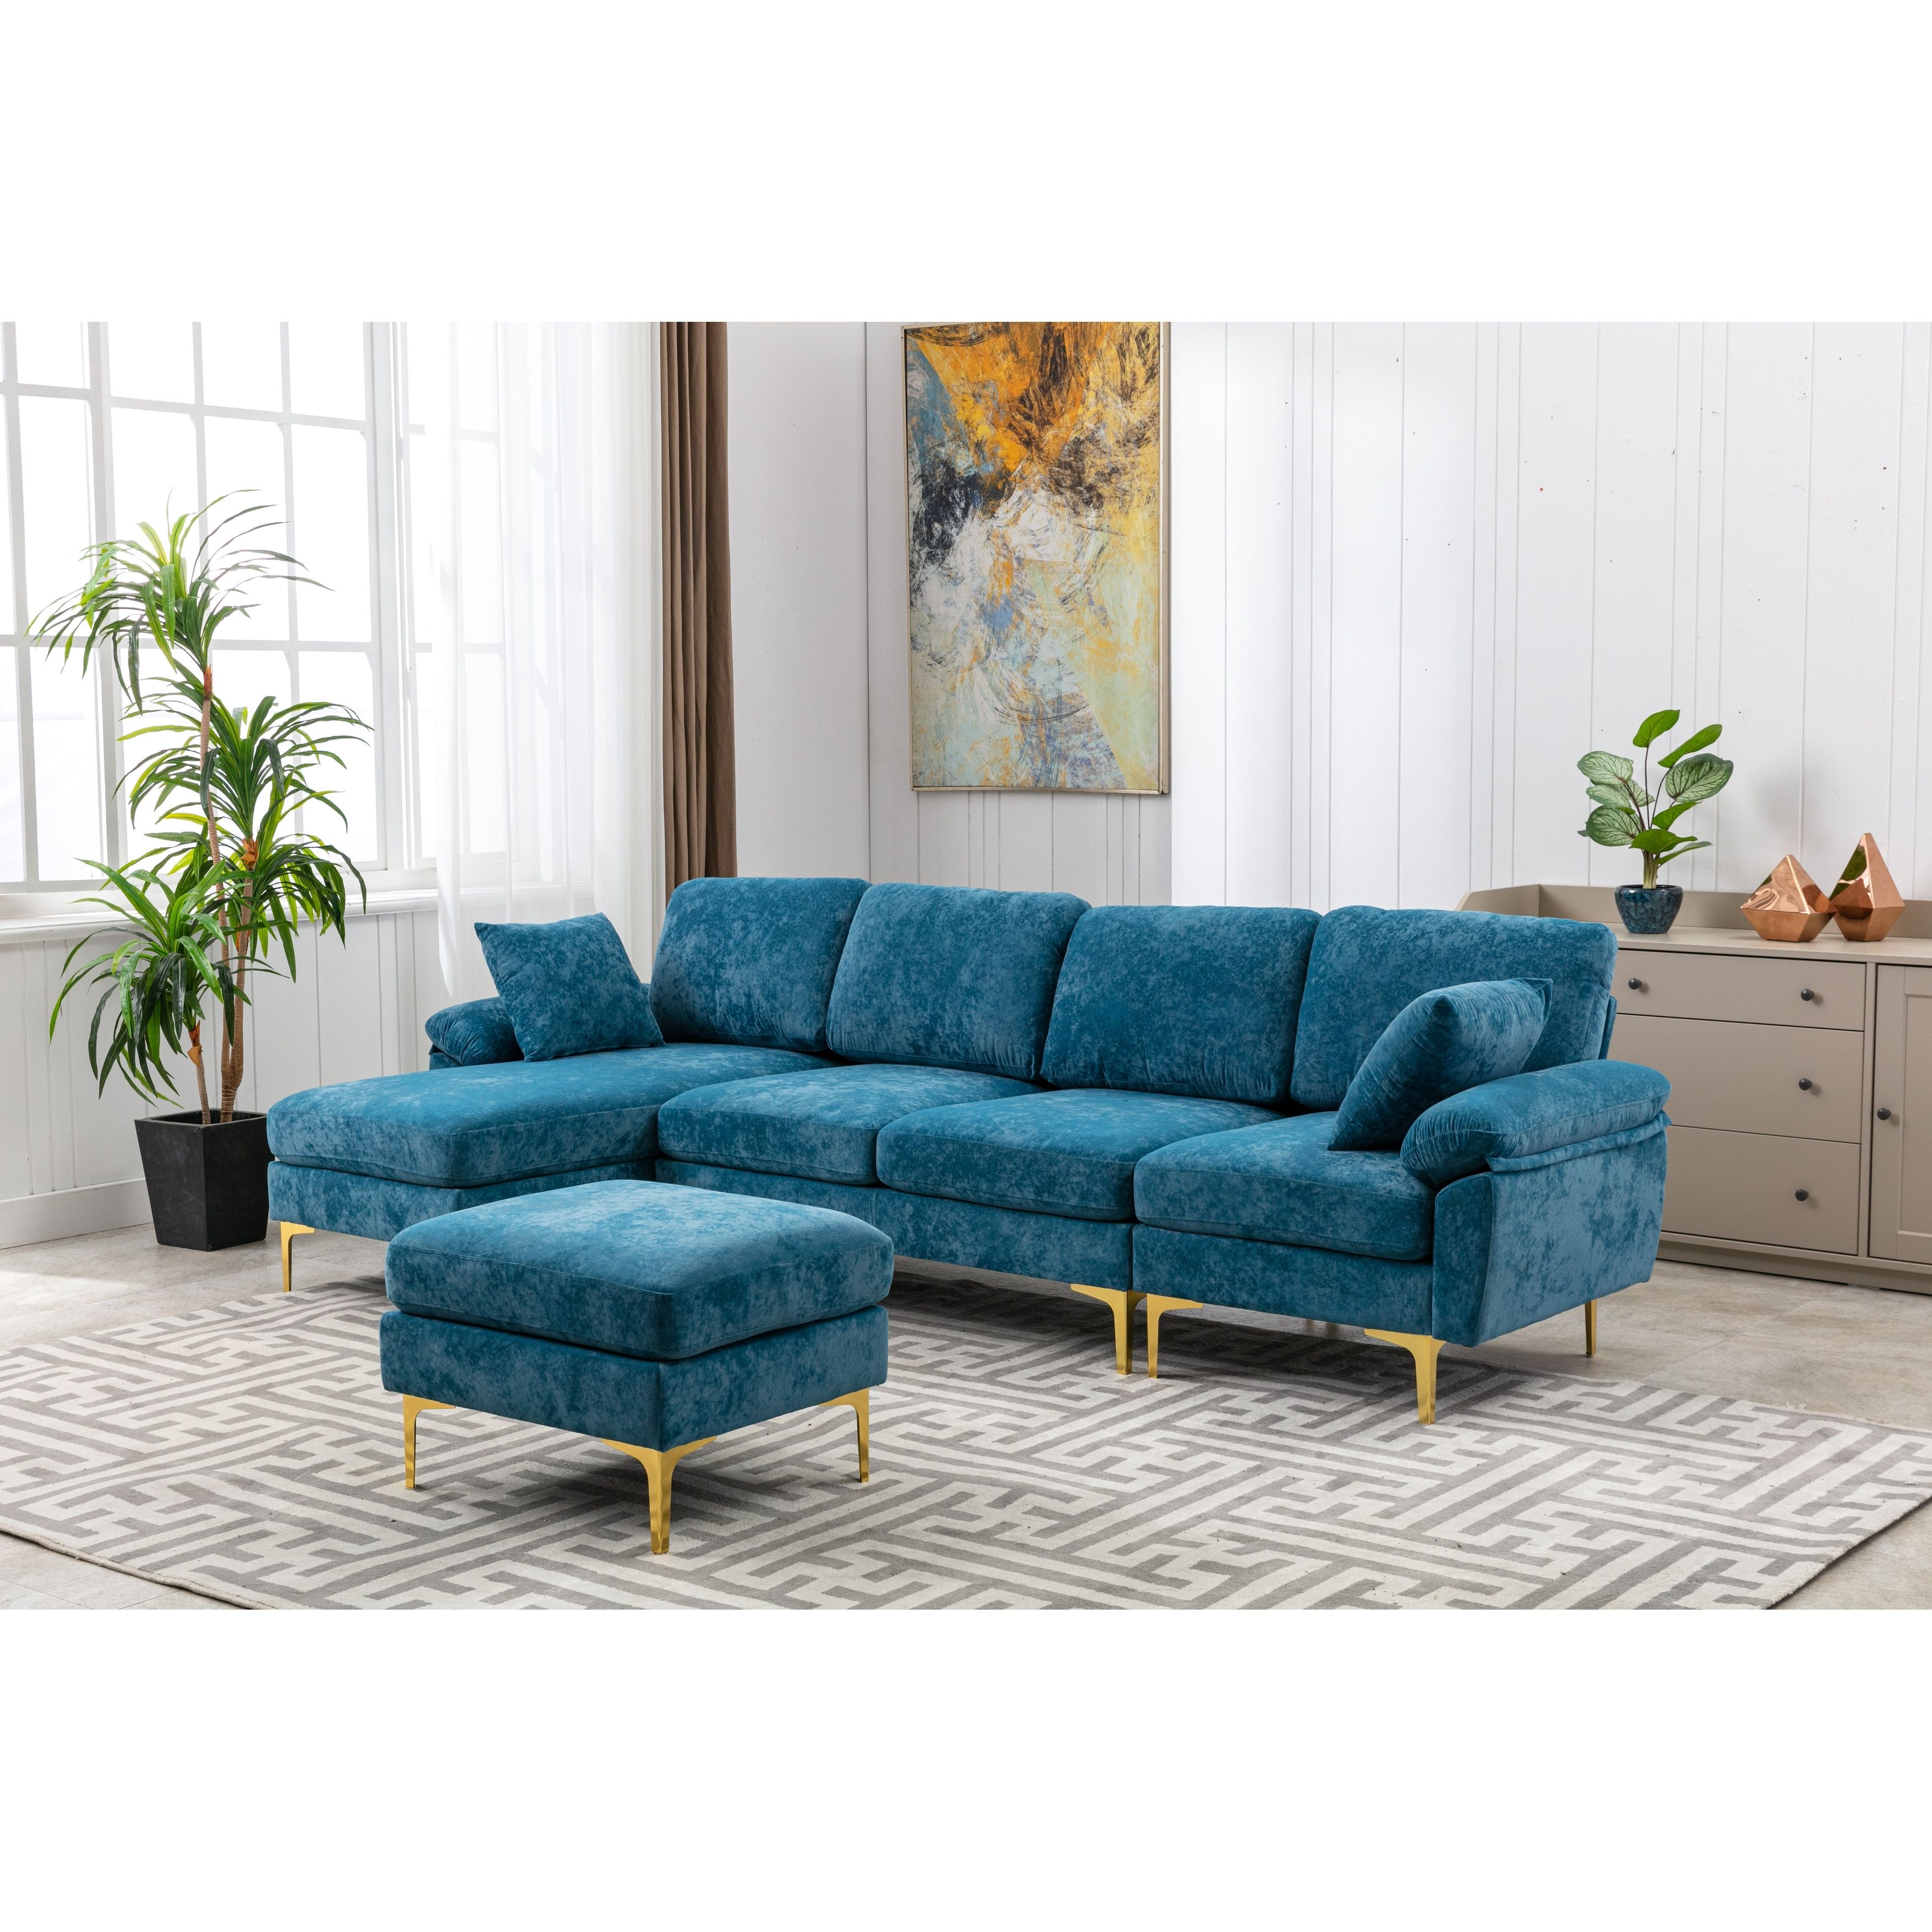 Living Room Sectional Sofa, L Shaped Upholstered Couch With Movable Ottoman,  Convertible Modular Sofa With Gold Metal Legs – – 36690154 Pertaining To Sectional Sofas With Movable Ottoman (View 13 of 15)